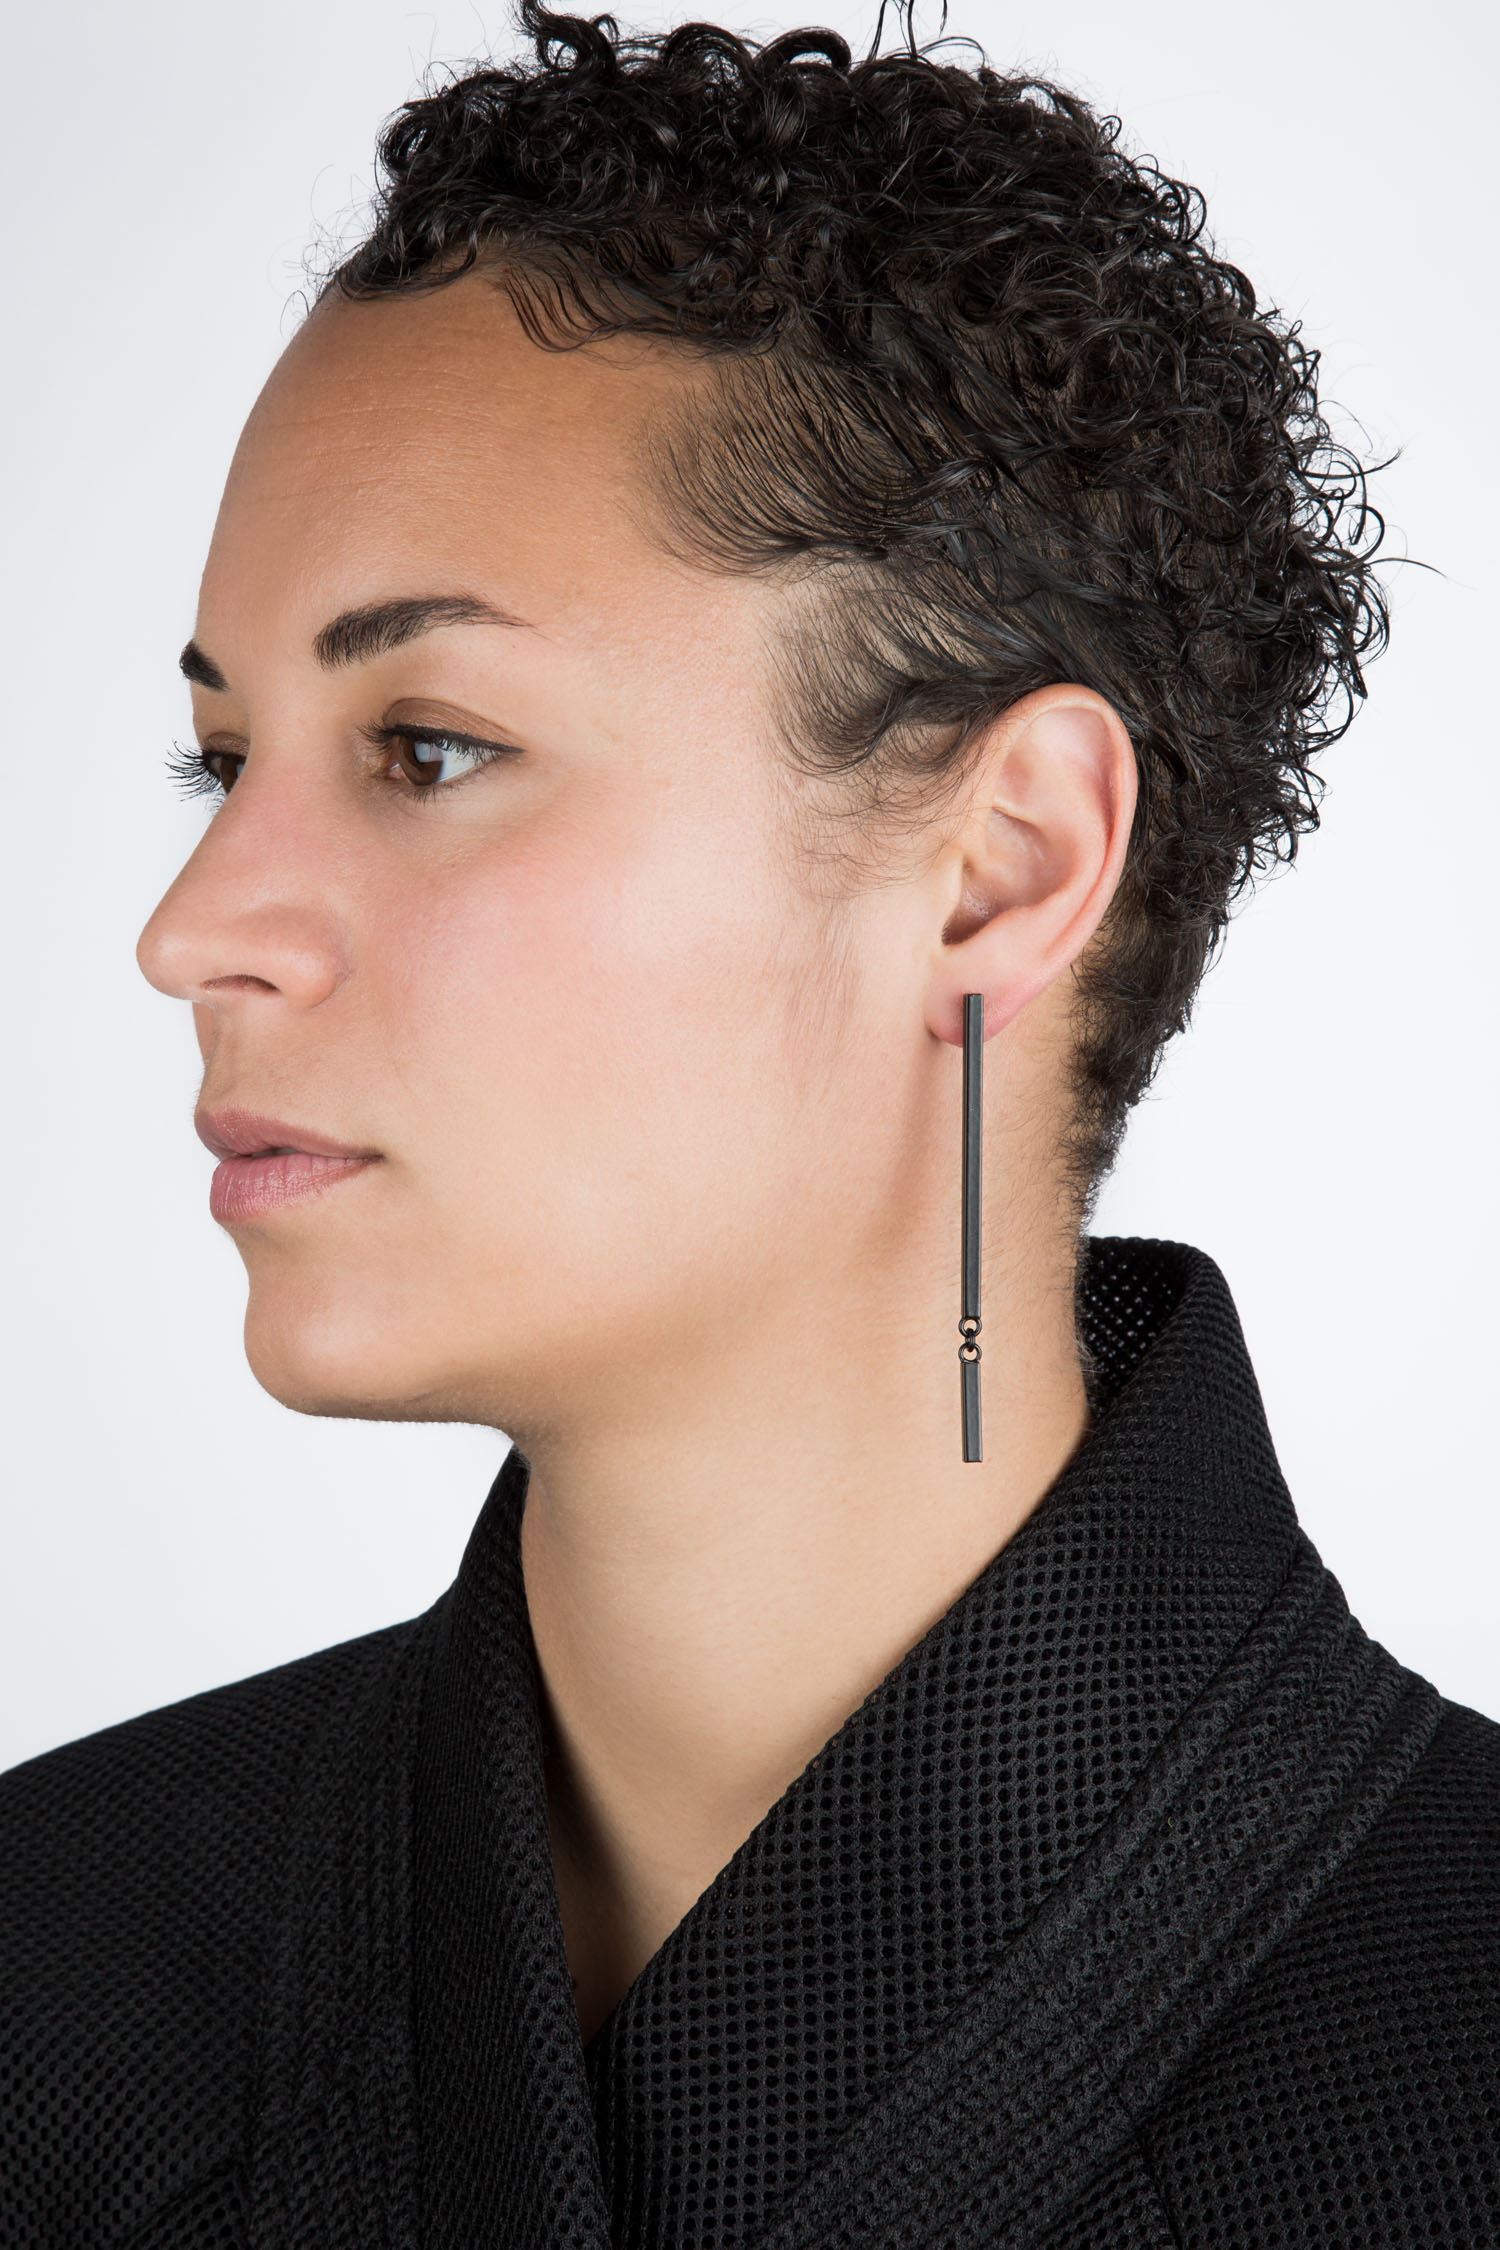 Black and White earrings, Minimal Style made from Silver, Brass and Powdercoating by Lena Wunderlich